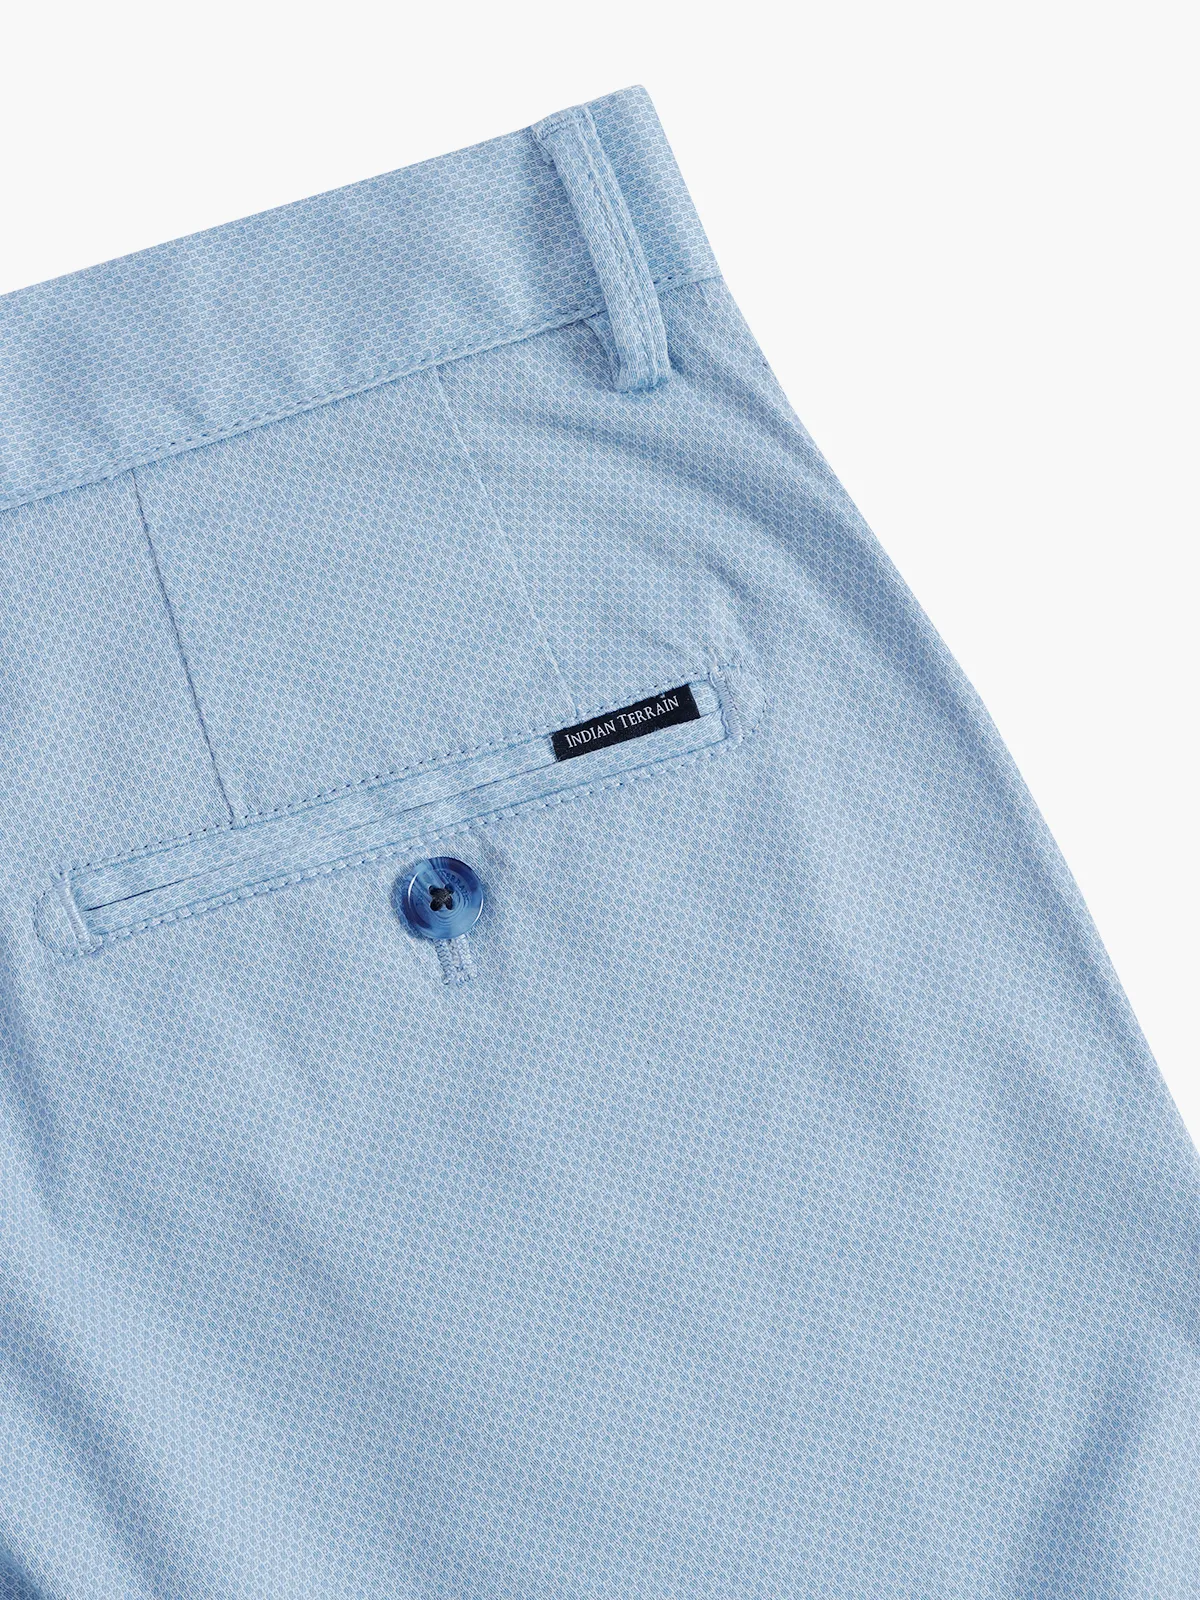 Indian Terrain sky blue cotton trouser in solid